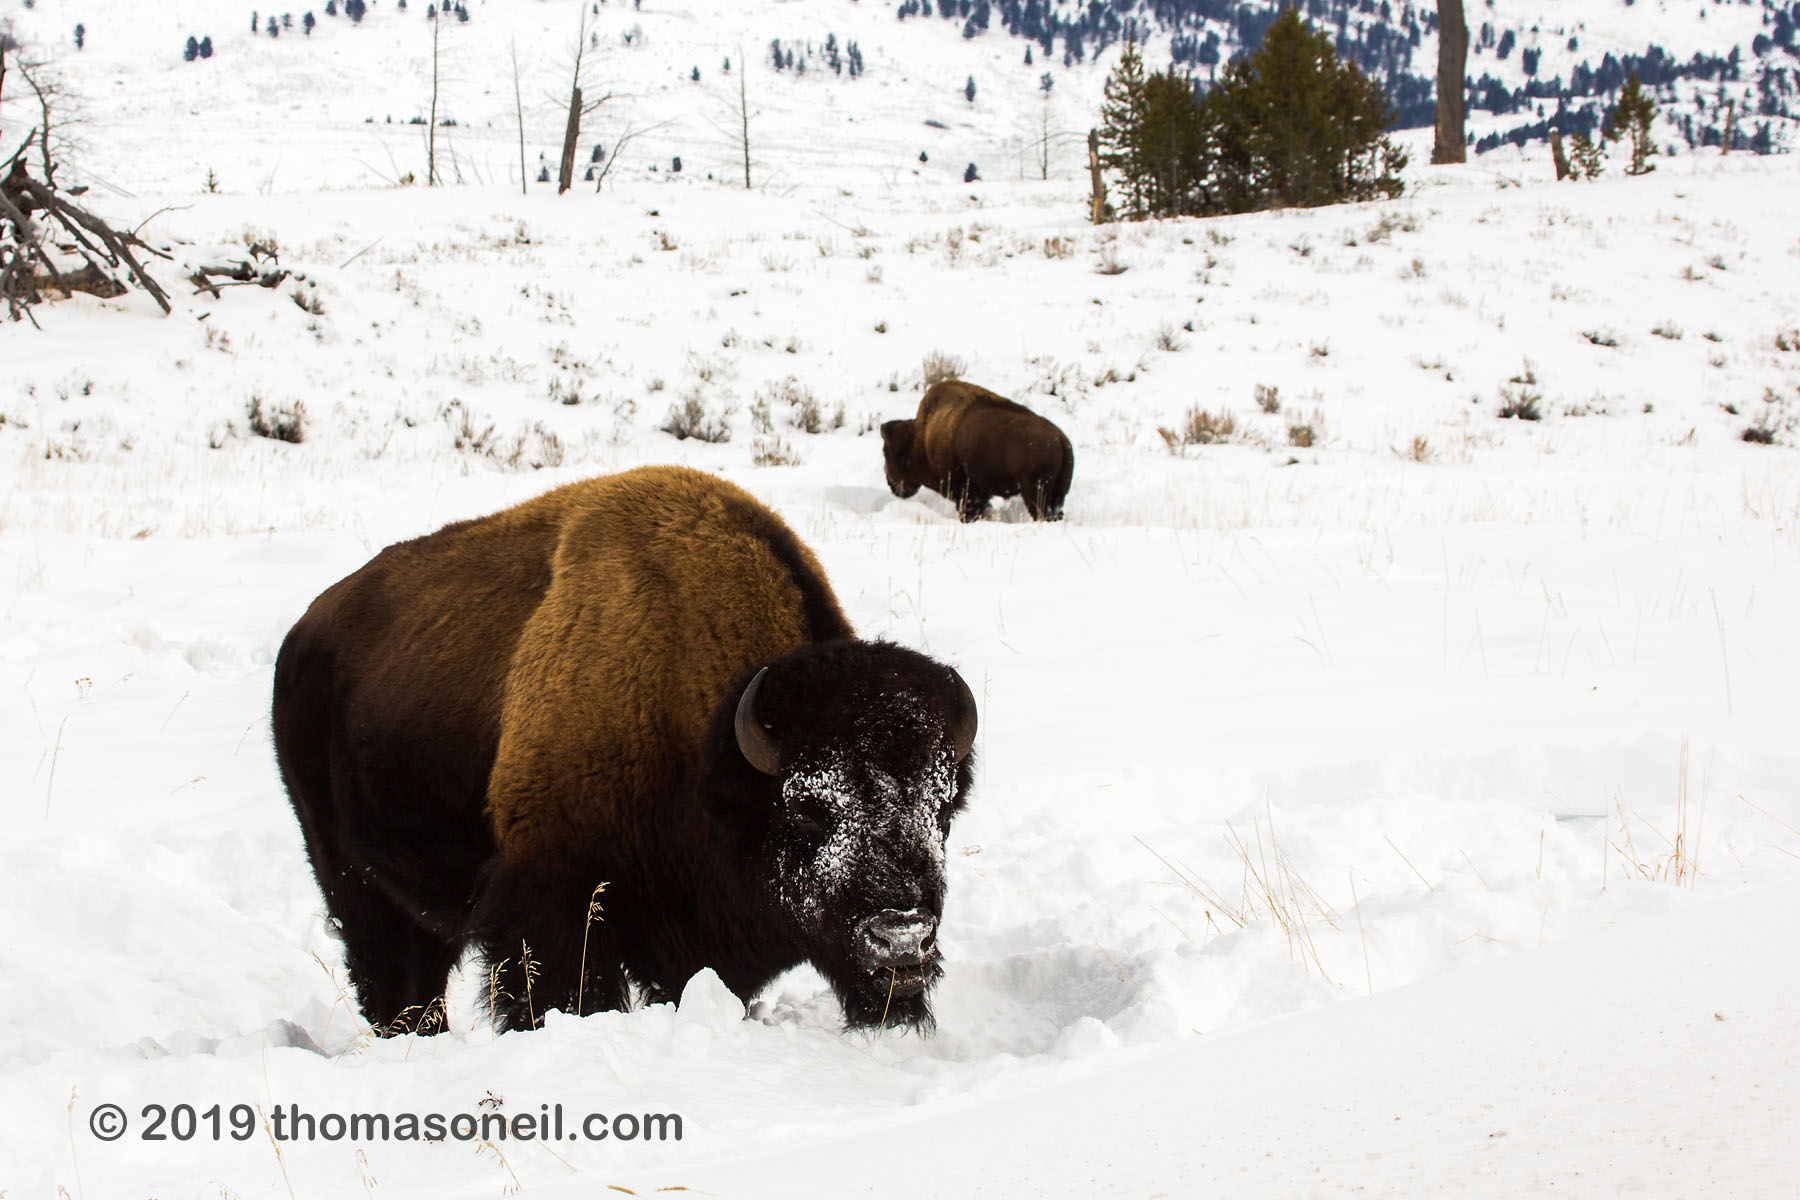 Bison, between Mammoth and Tower, Yellowstone National Park, January 31, 2019.  Click for next photo.